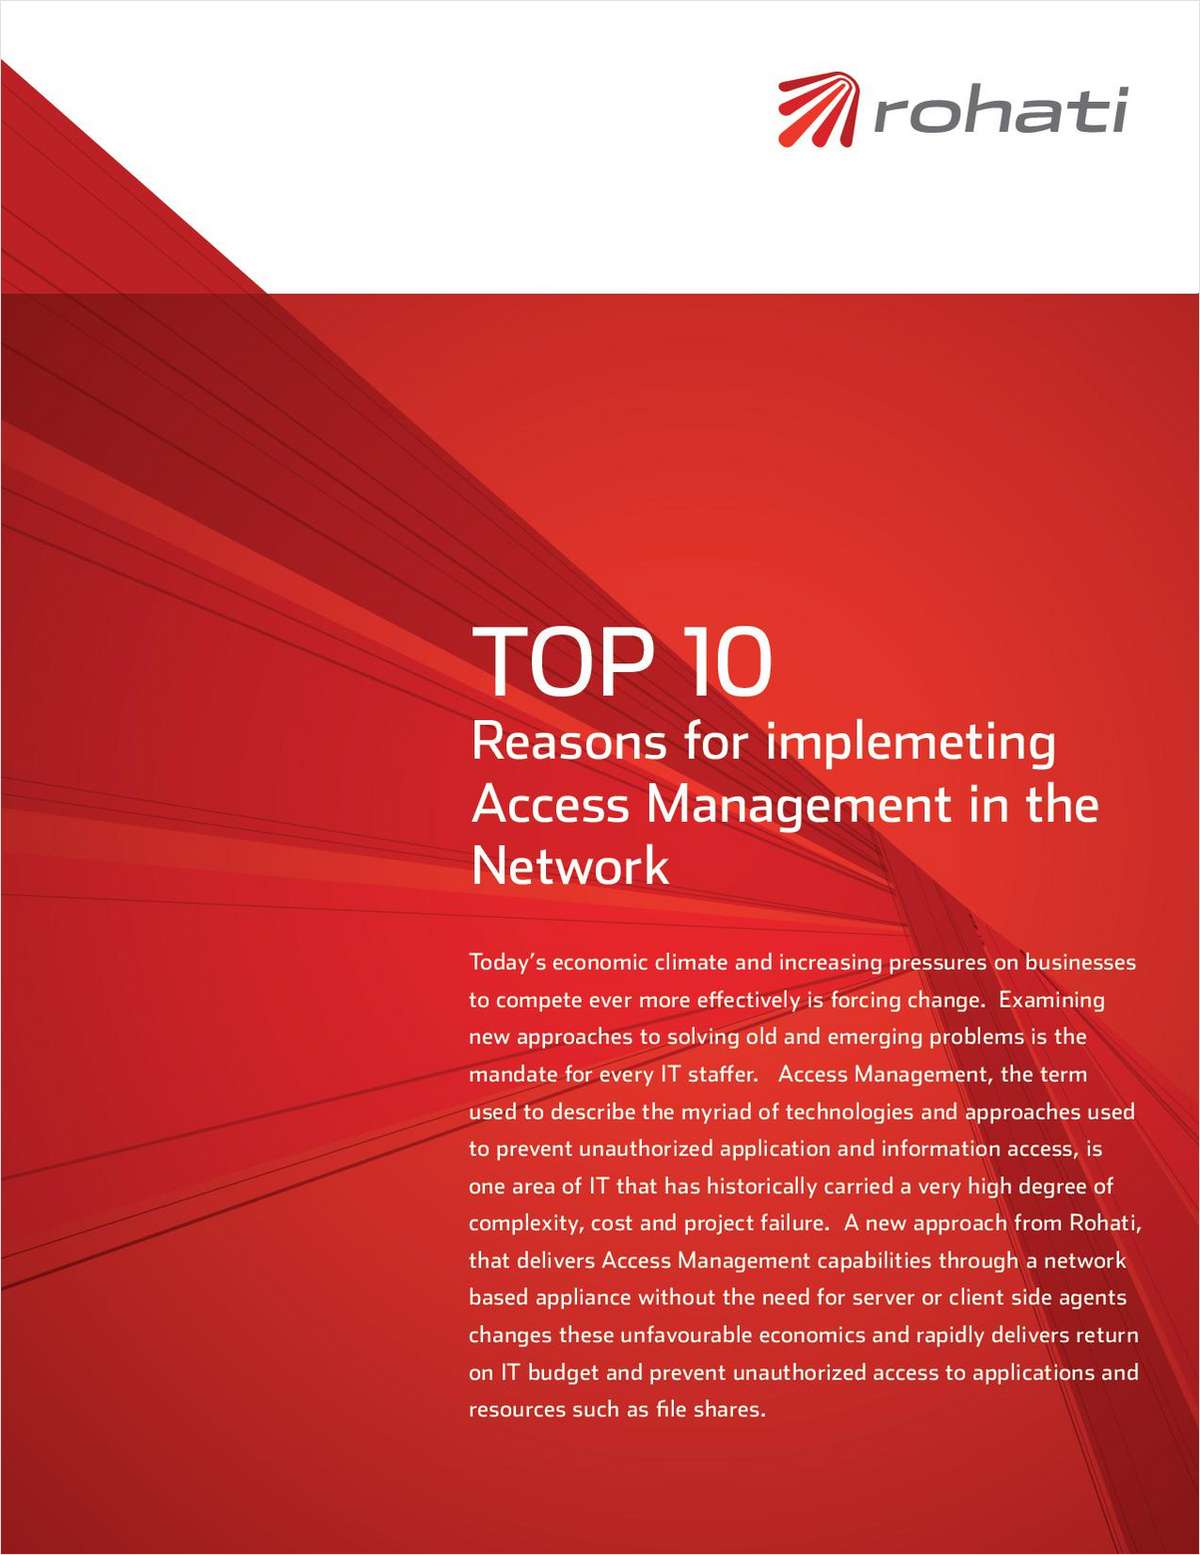 Top 10 Reasons for Implementing Access Management in the Network